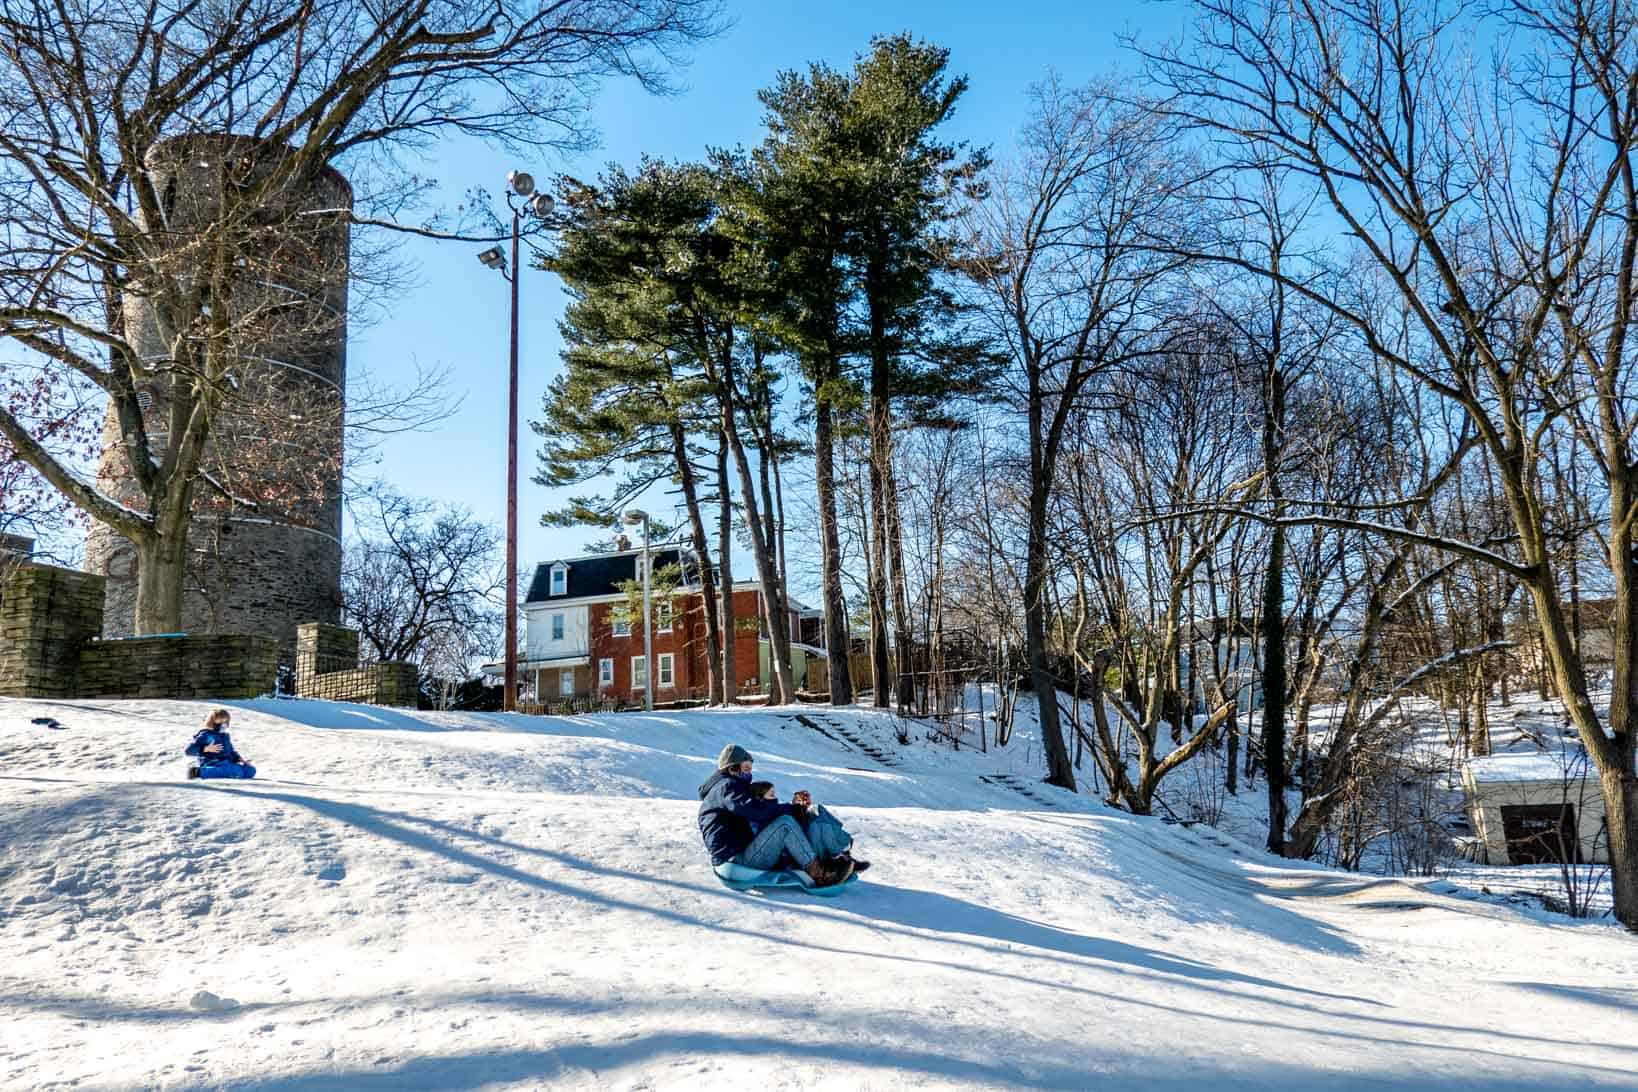 People sledding on a hill with a tall stone tower in the background